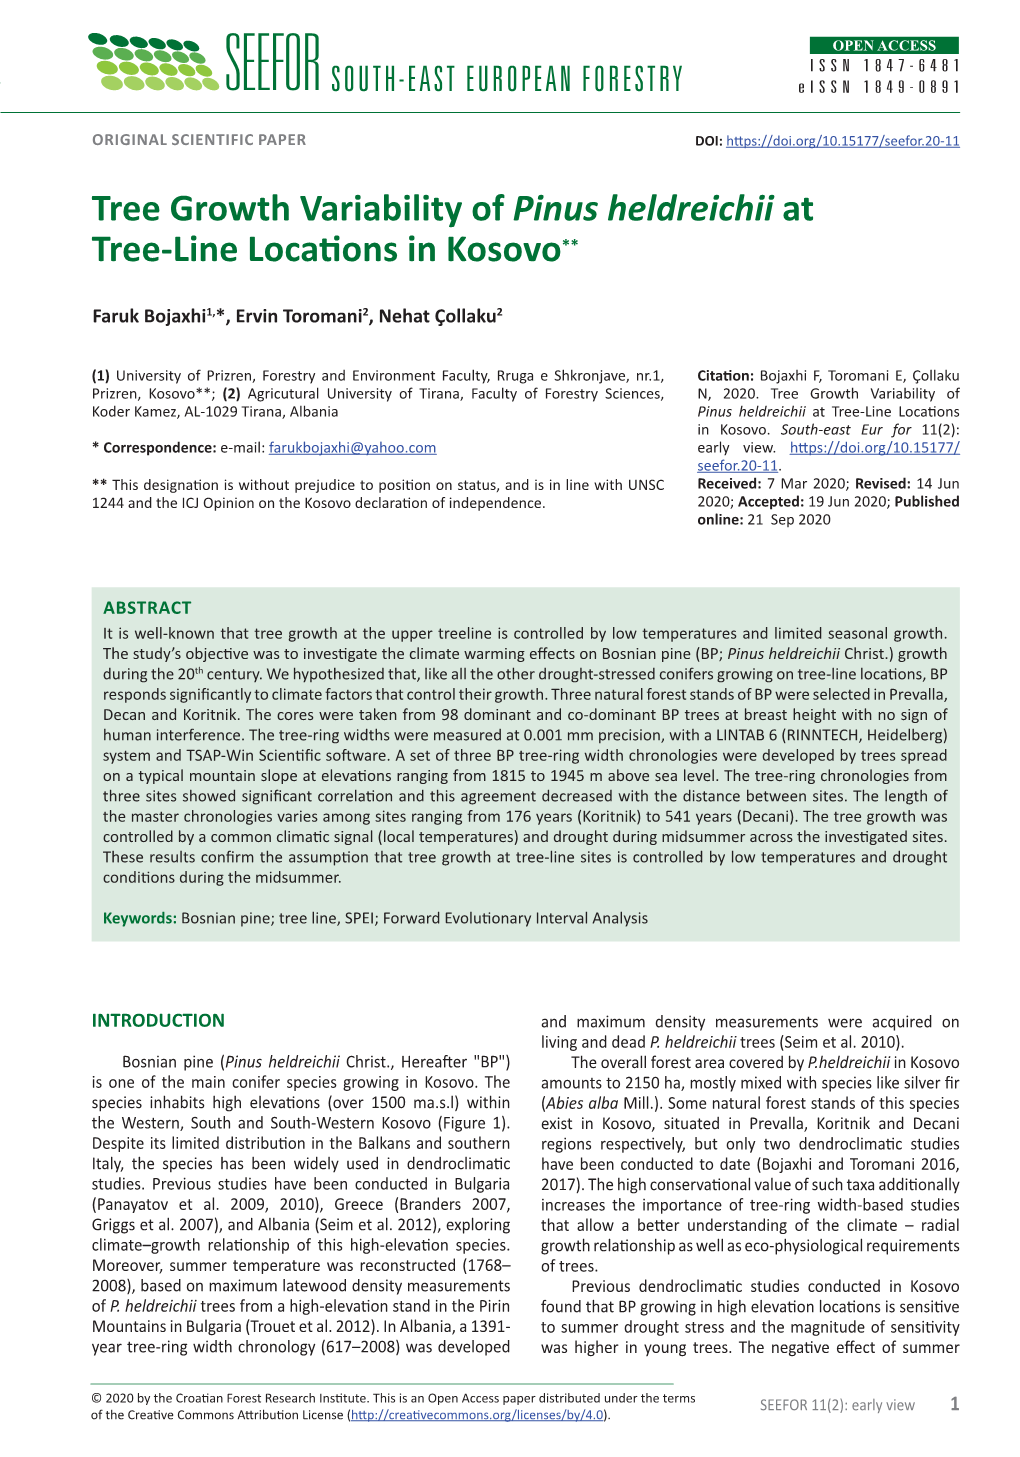 Tree Growth Variability of Pinus Heldreichii at Tree-Line Locations in Kosovo**